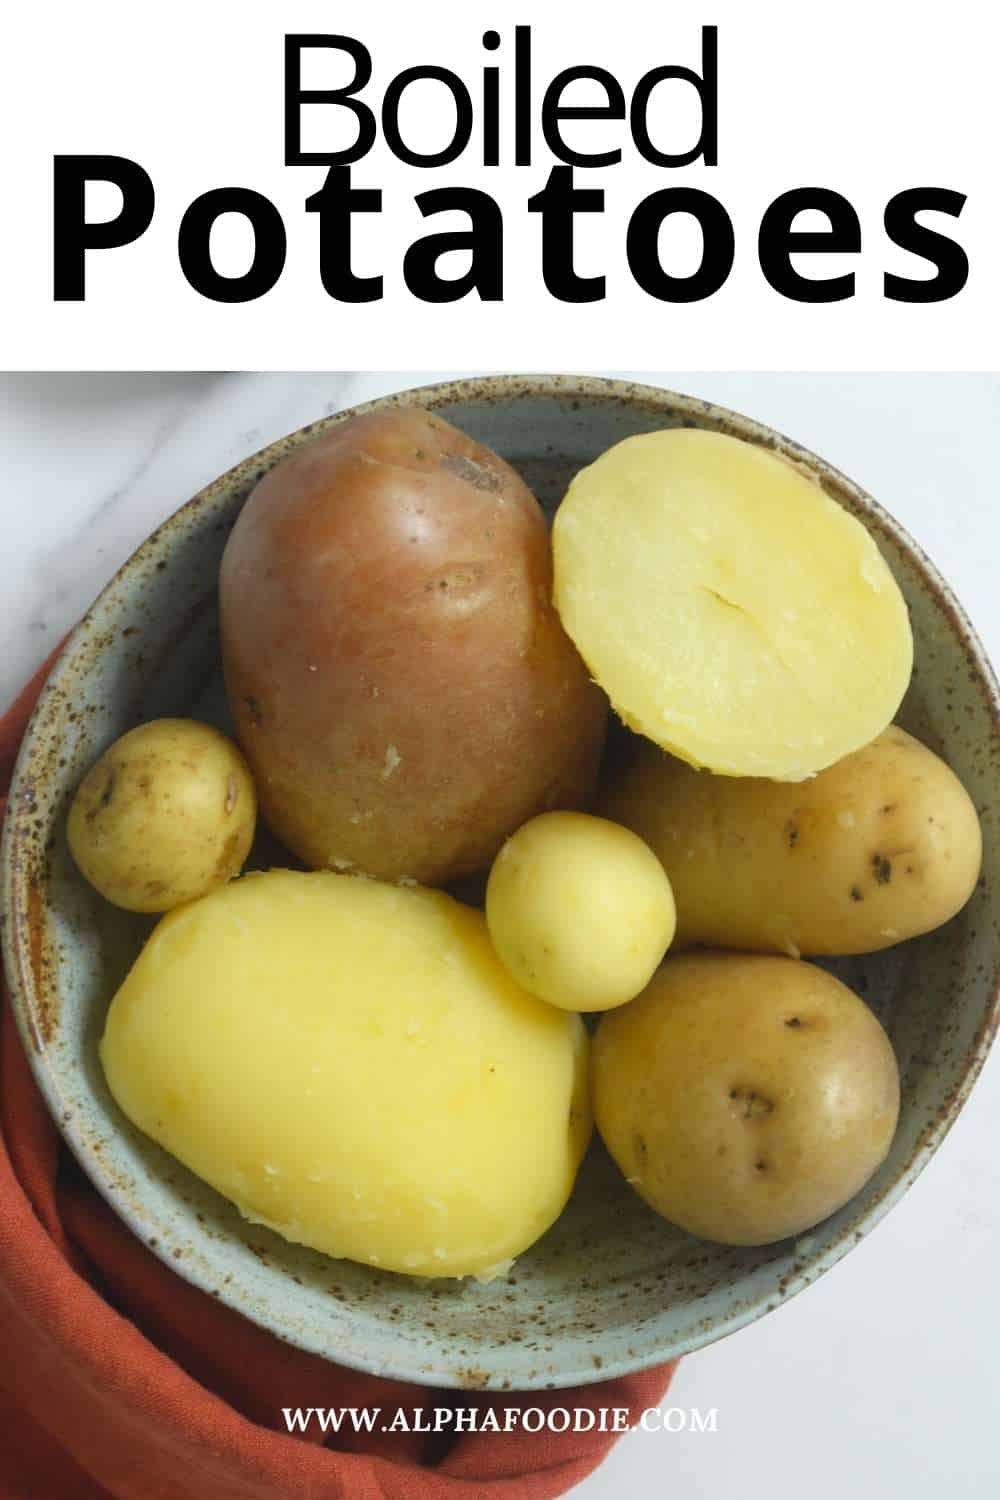 How to Boil Potatoes That Are Whole or Cubed - Alphafoodie